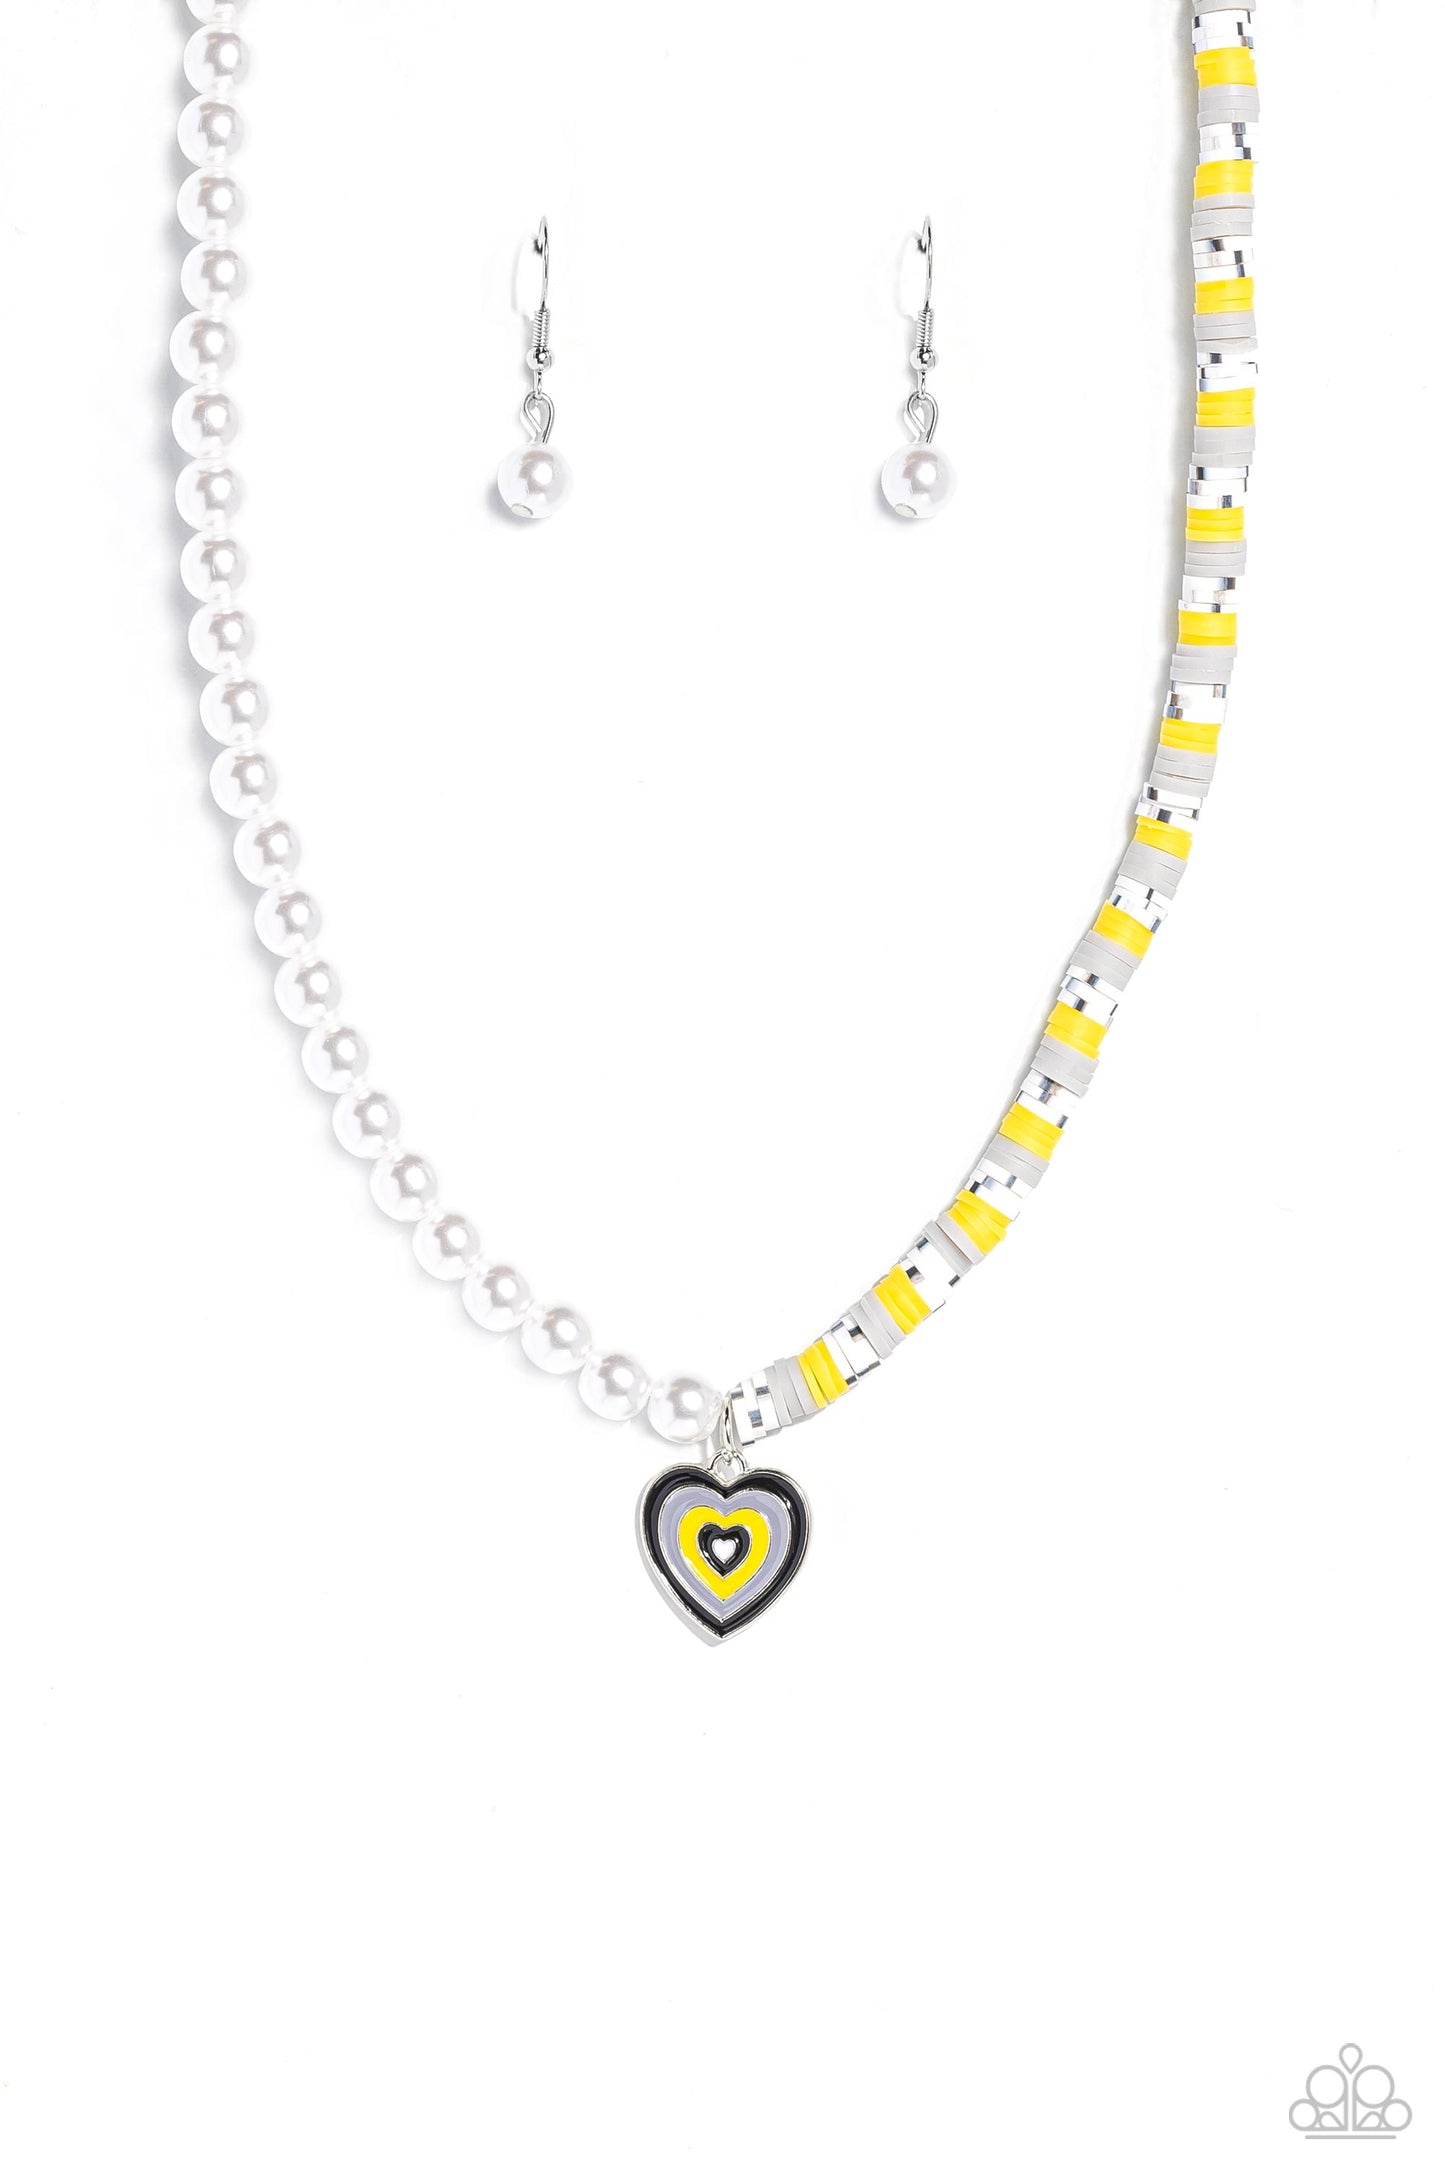 Precise Psychedelic - Black, Yellow, & Gray Clay Discs/White Pearls/Heart Pendant Paparazzi Necklace & matching earrings